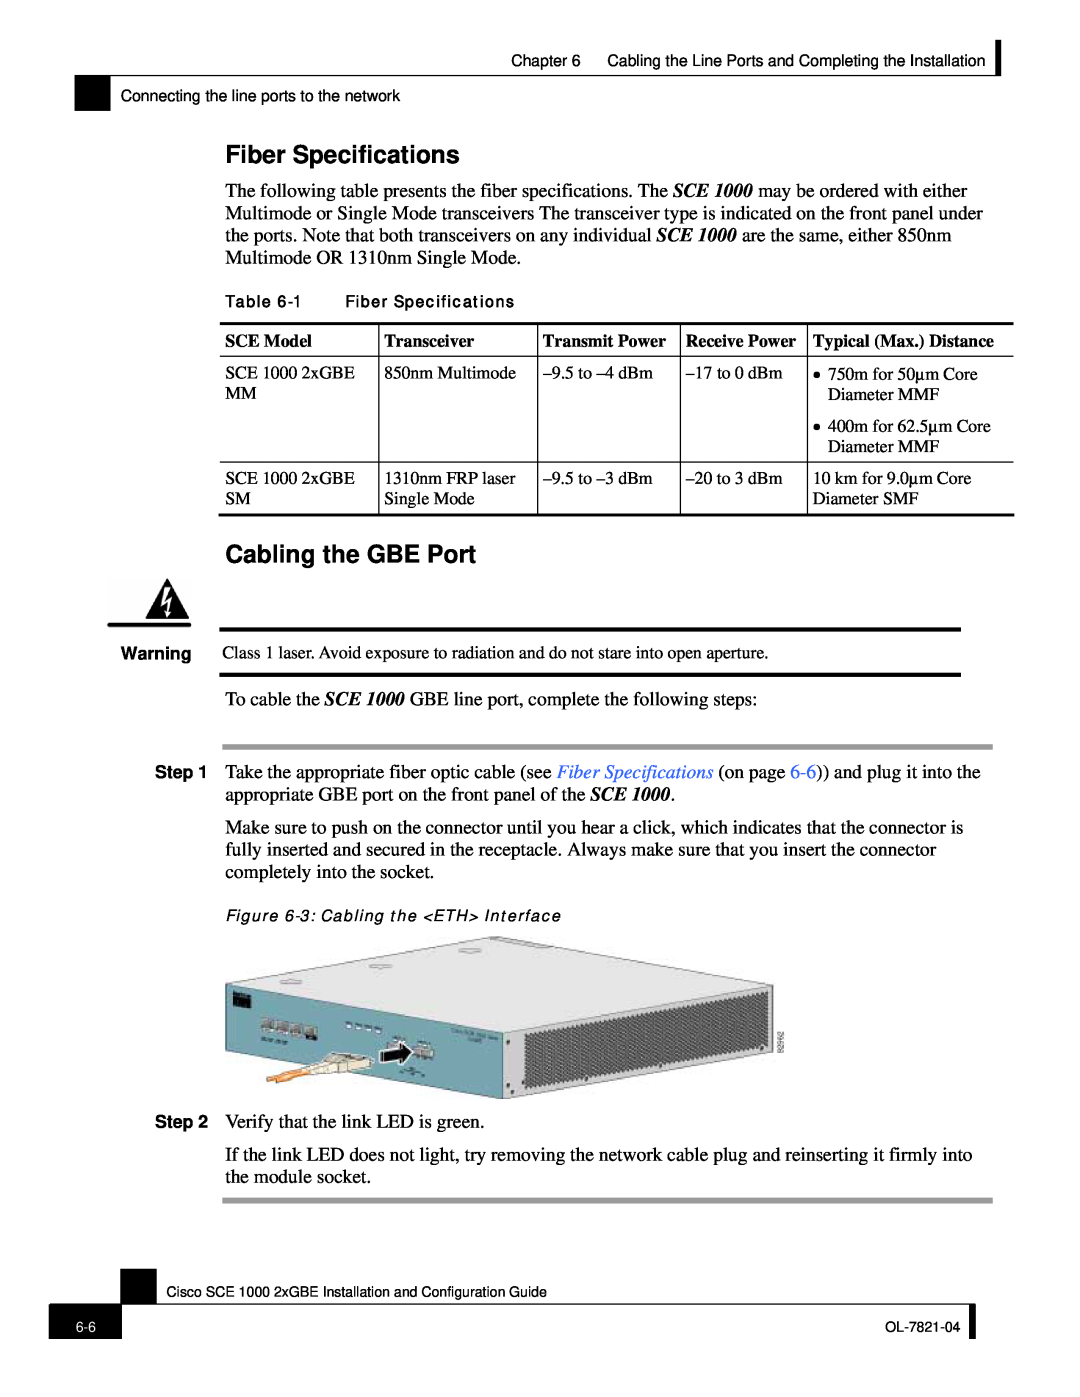 Cisco Systems OL-7821-04, SCE 1000 2xGBE manual Fiber Specifications, Cabling the GBE Port 